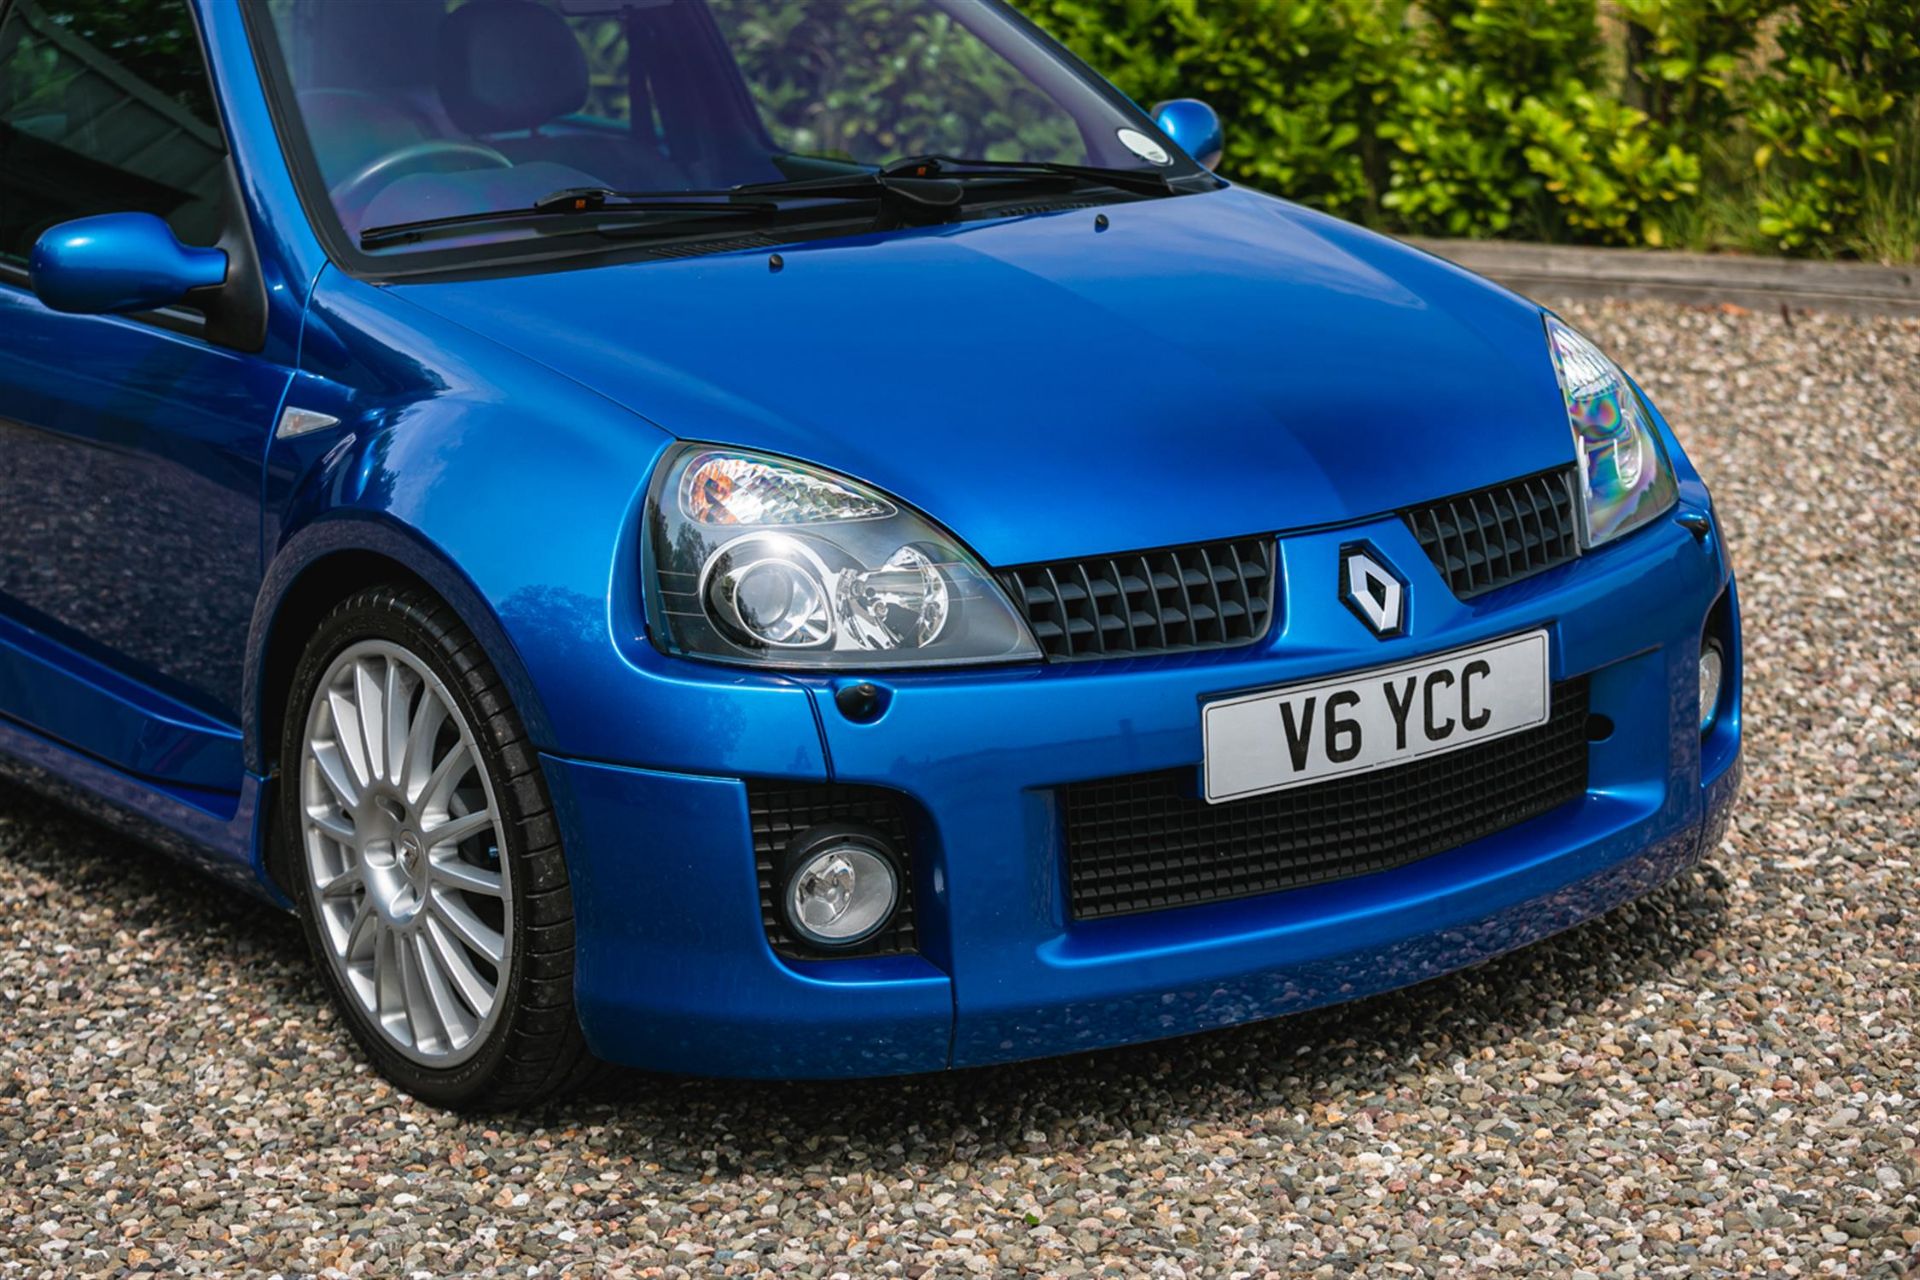 2003 Renault Clio V6 RenaultSport (255) Phase 2 - Image 8 of 10